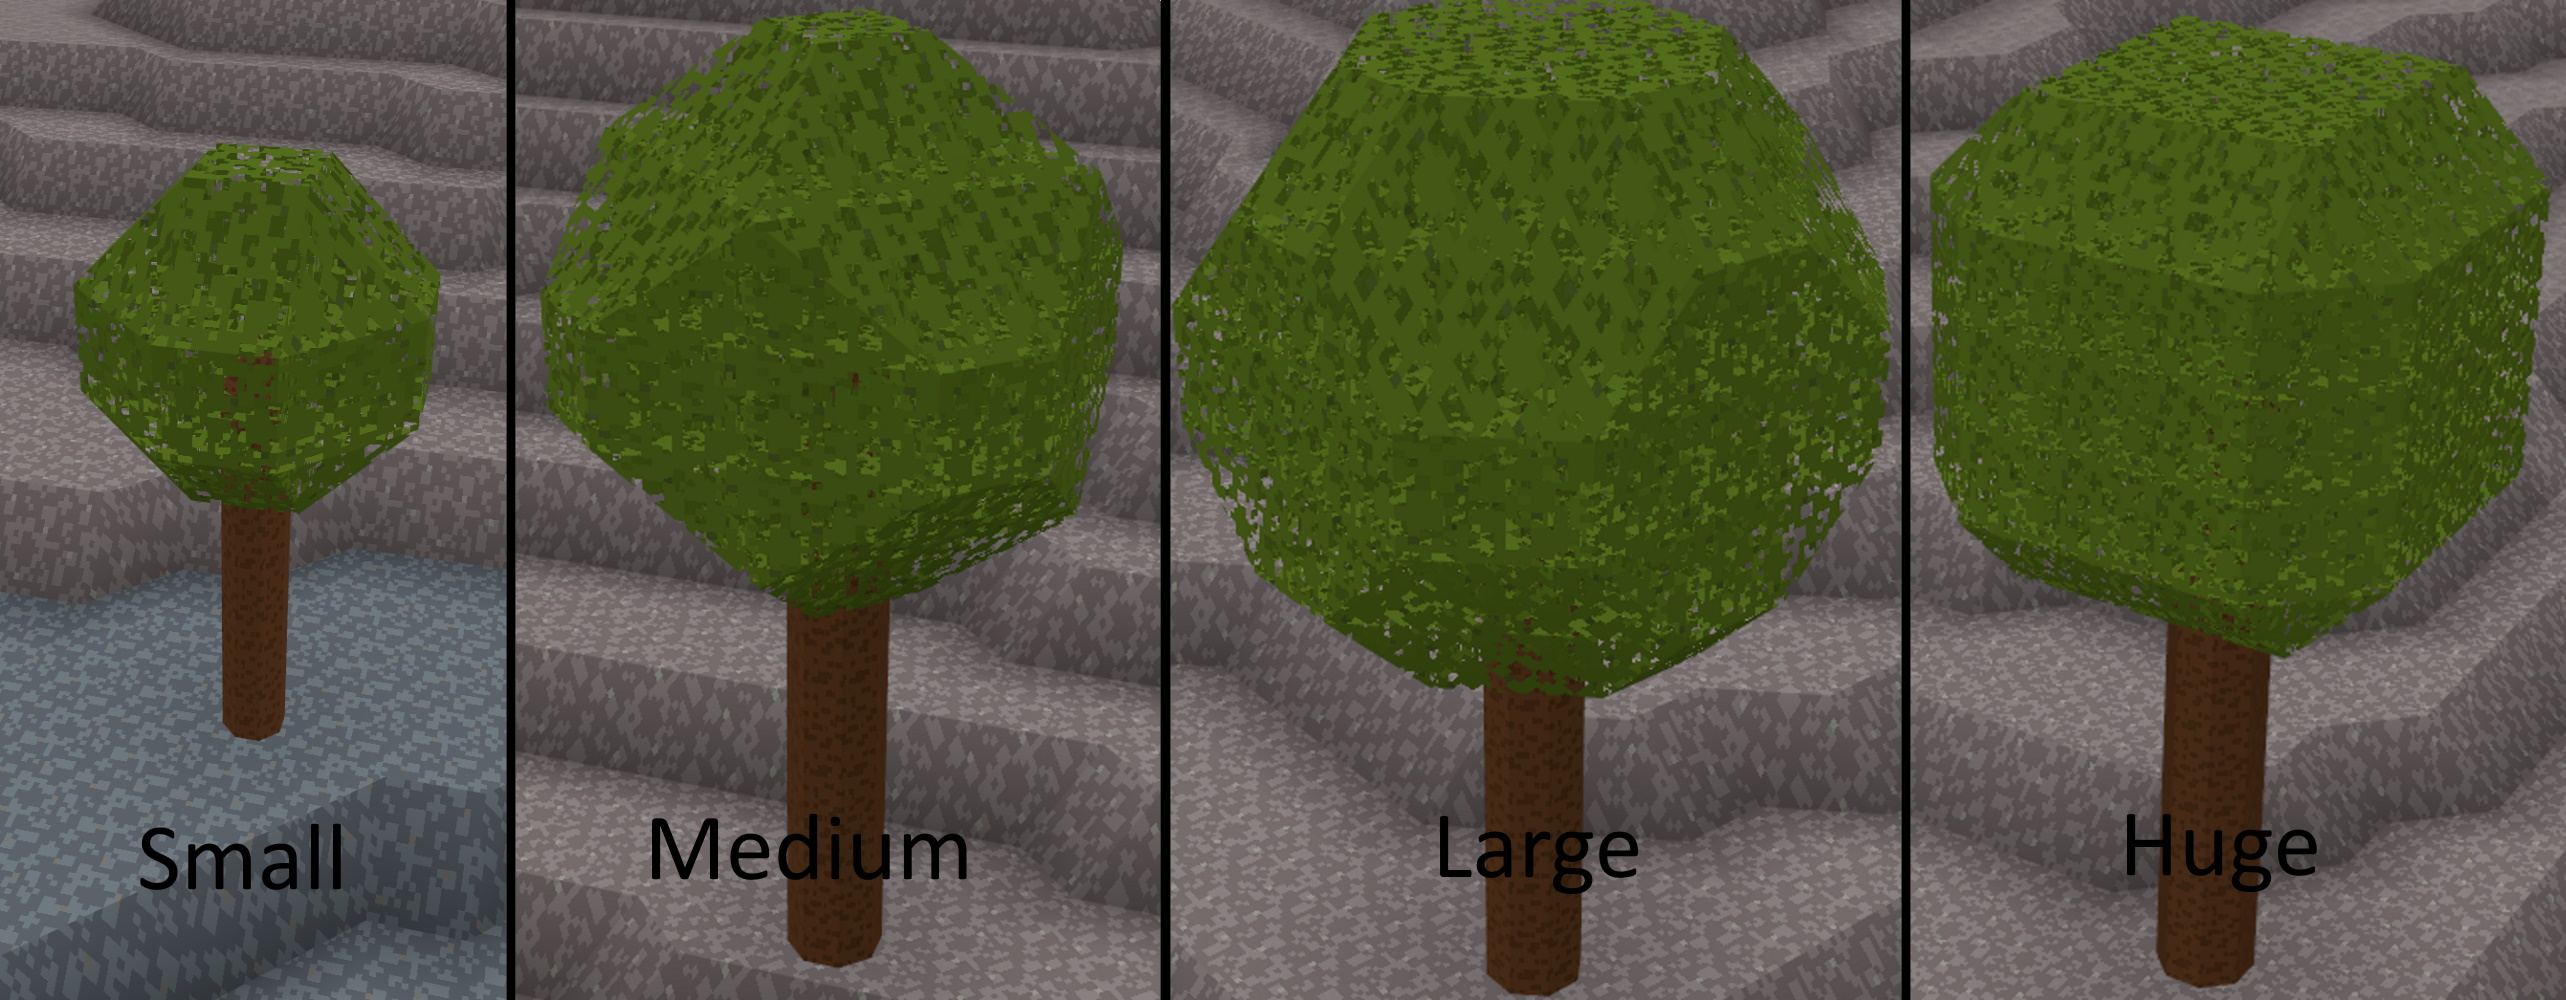 Leaf ball sizes. Small is 3x3x3, the others 5x5x5